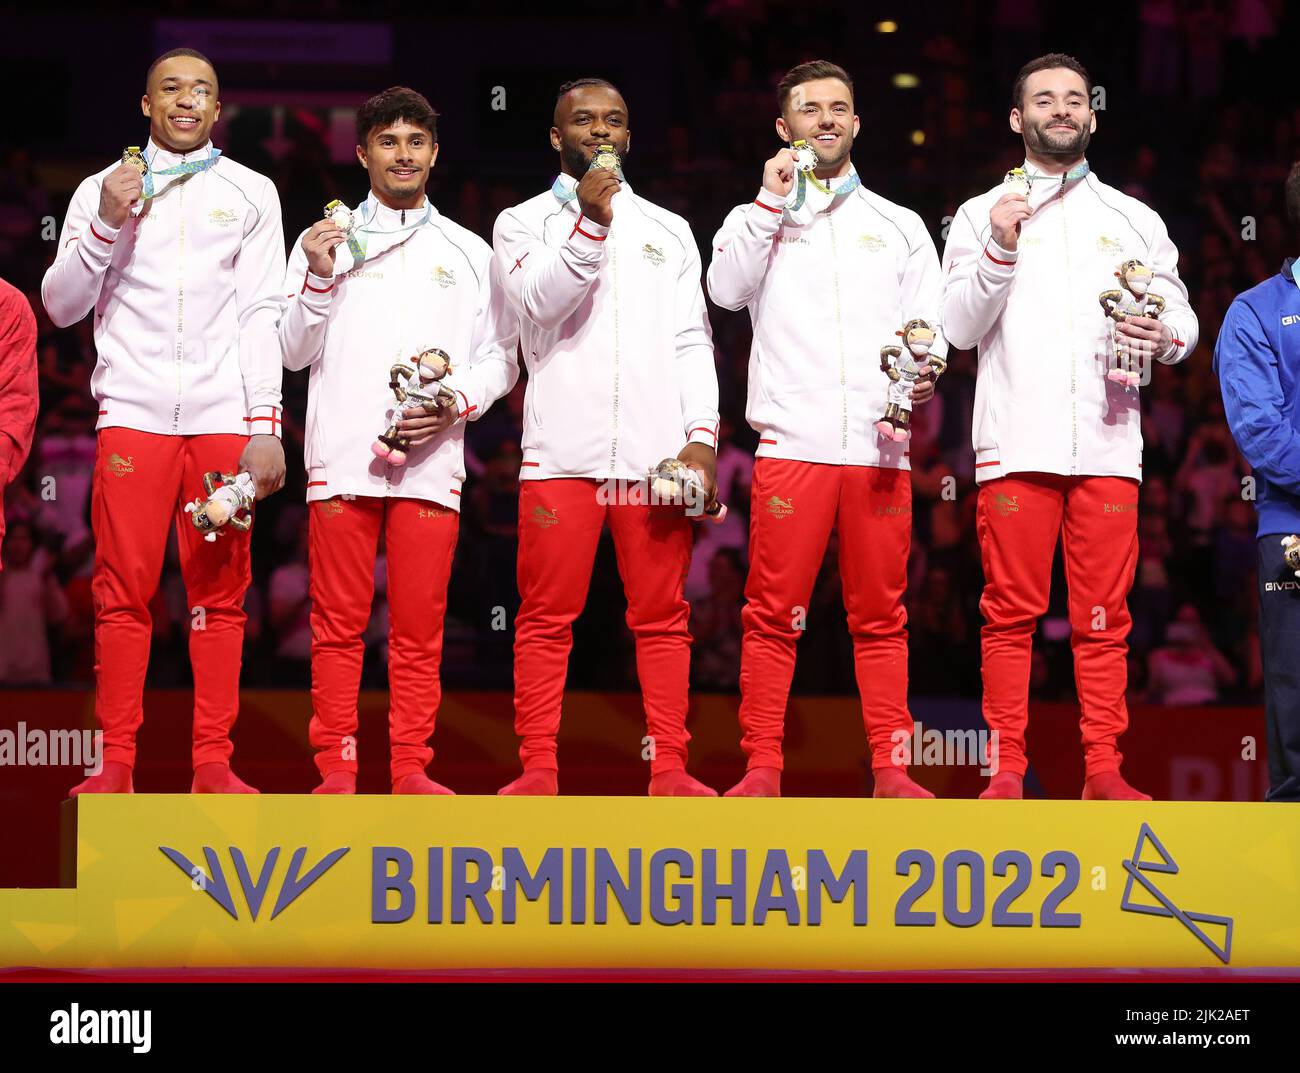 Birmingham, UK. 29th July 2022. The English team celebrate after winning Gold in the Gymnastics Mens team final during Day One of the Commonwealth Games, Birmingham. Credit: Paul Terry Photo/Alamy Live News Stock Photo